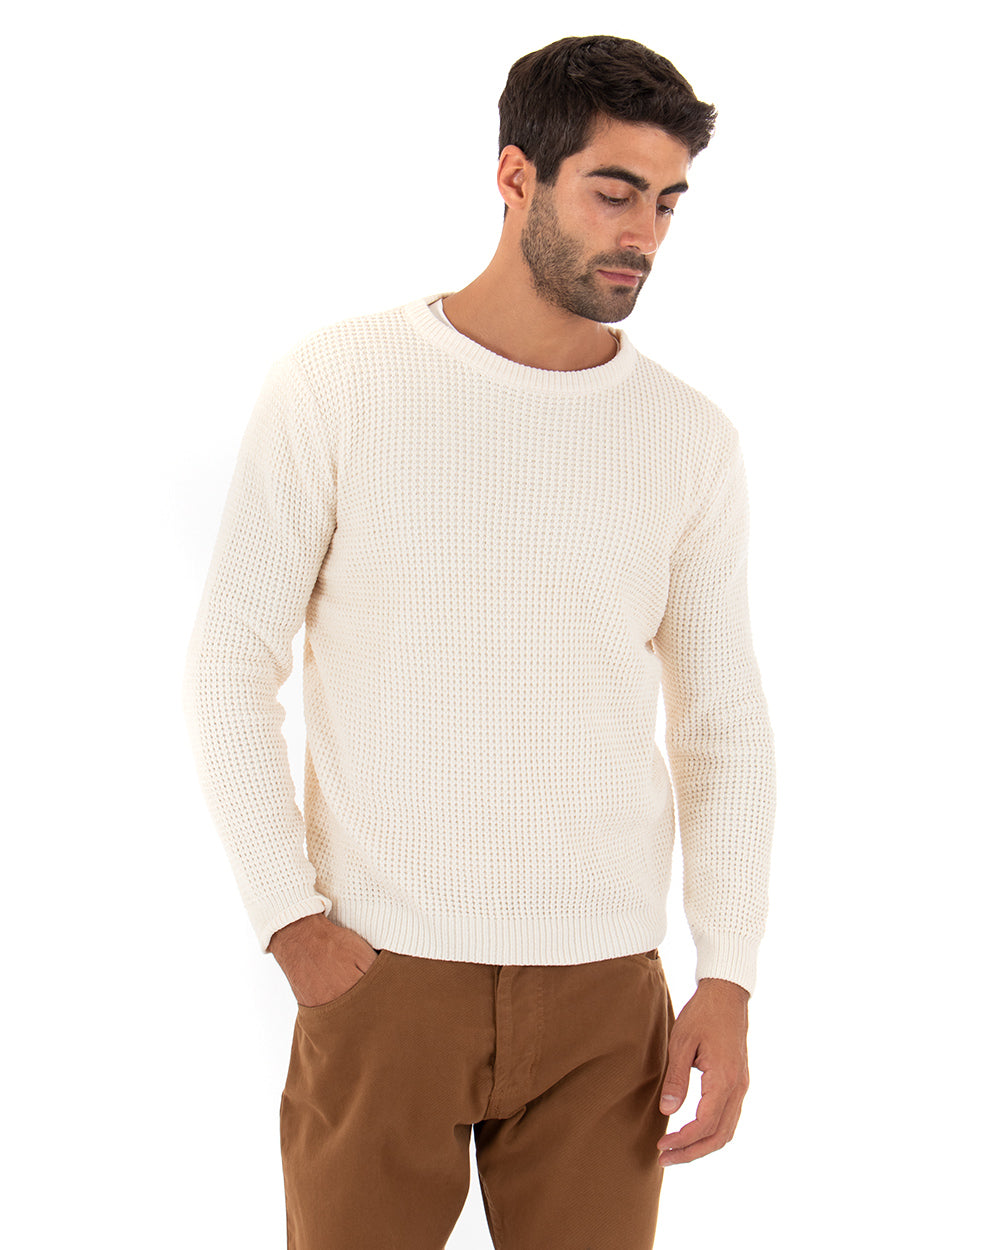 Men's Sweater Long Sleeves Chenille Solid Color Cream Crew Neck GIOSAL